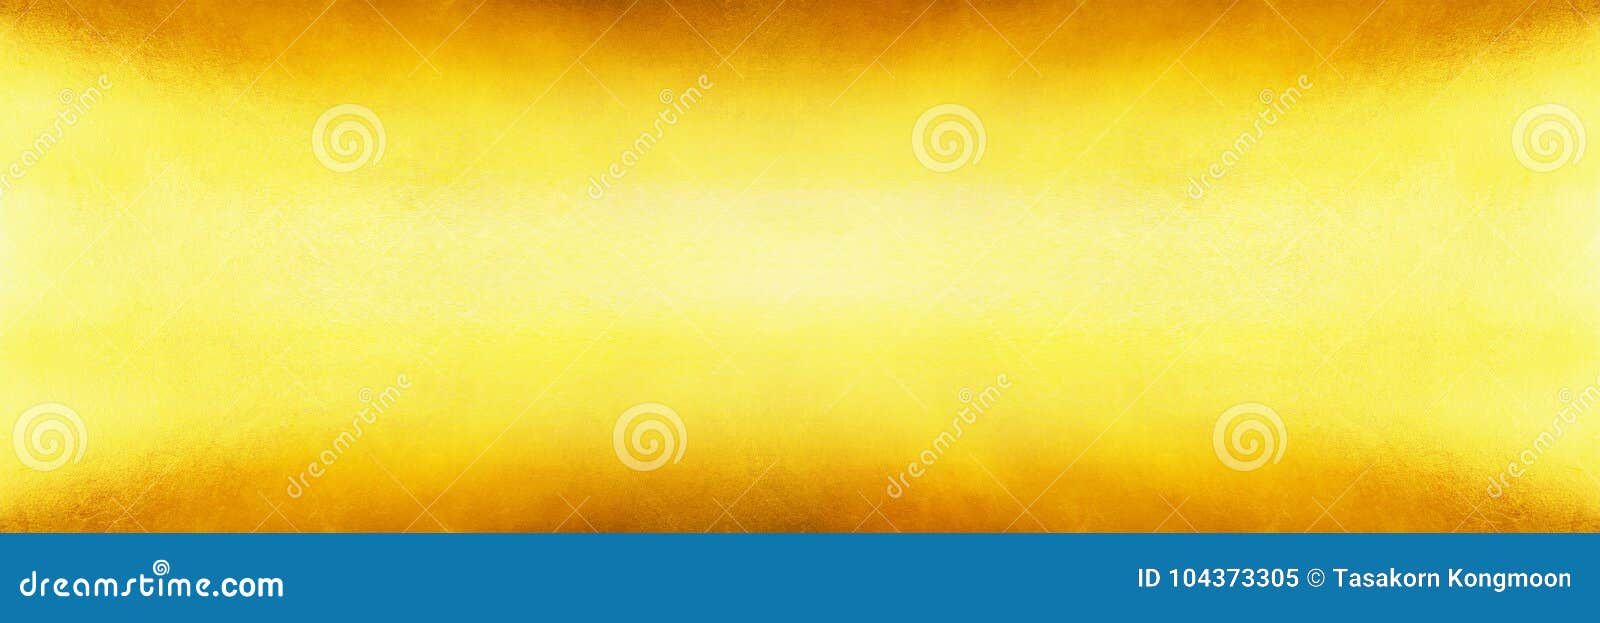 horizontal elegant light gold texture for background and 